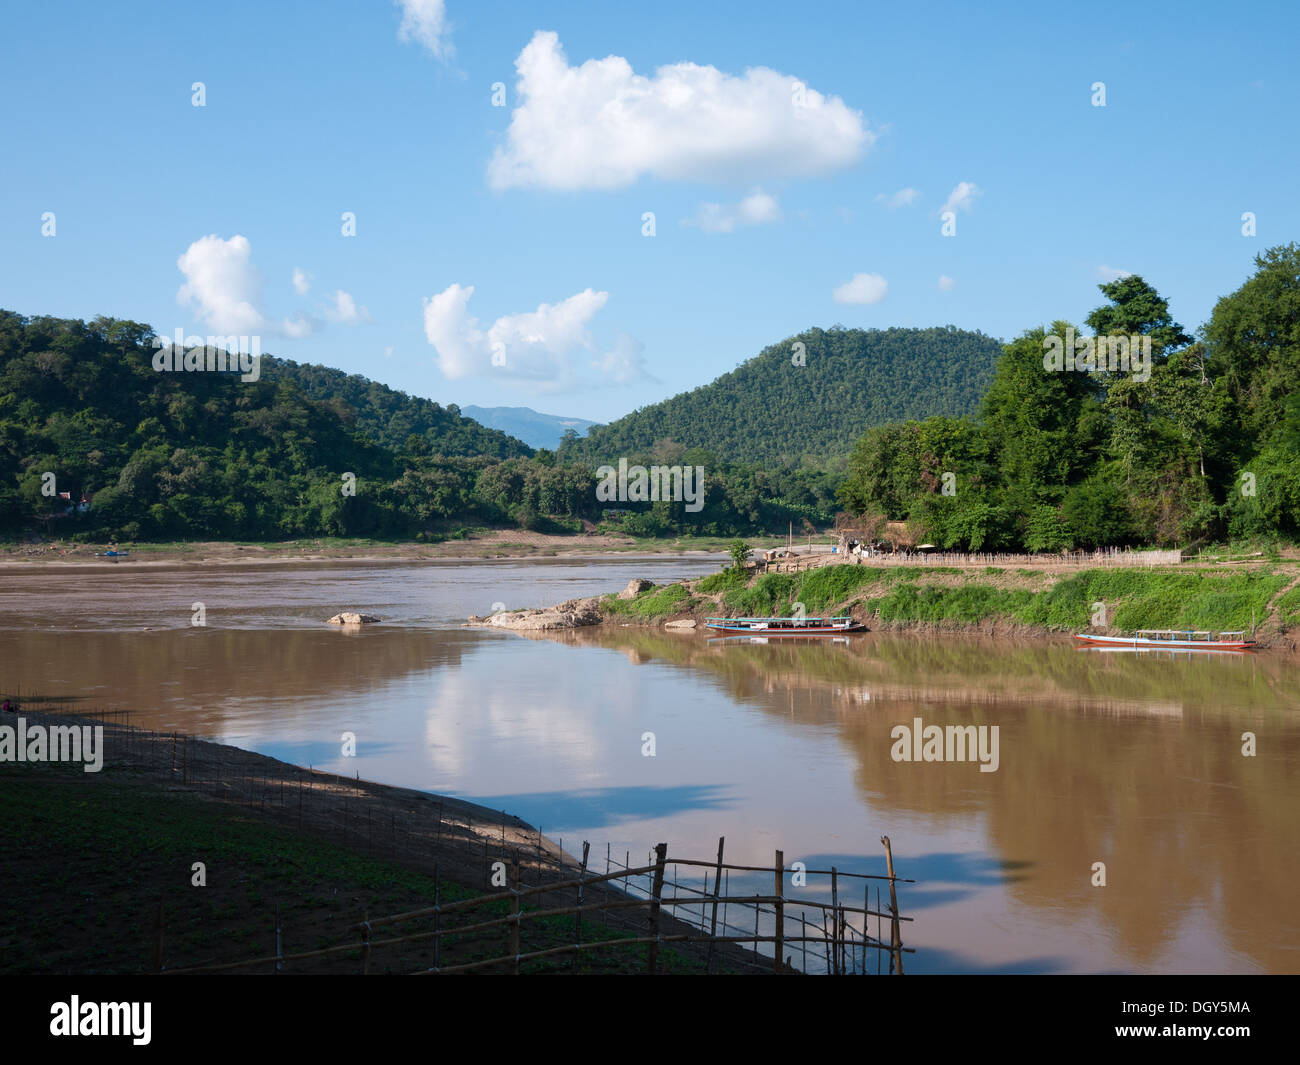 The confluence of the Mekong River and Nam Khan River in Luang Prabang, Laos. Stock Photo